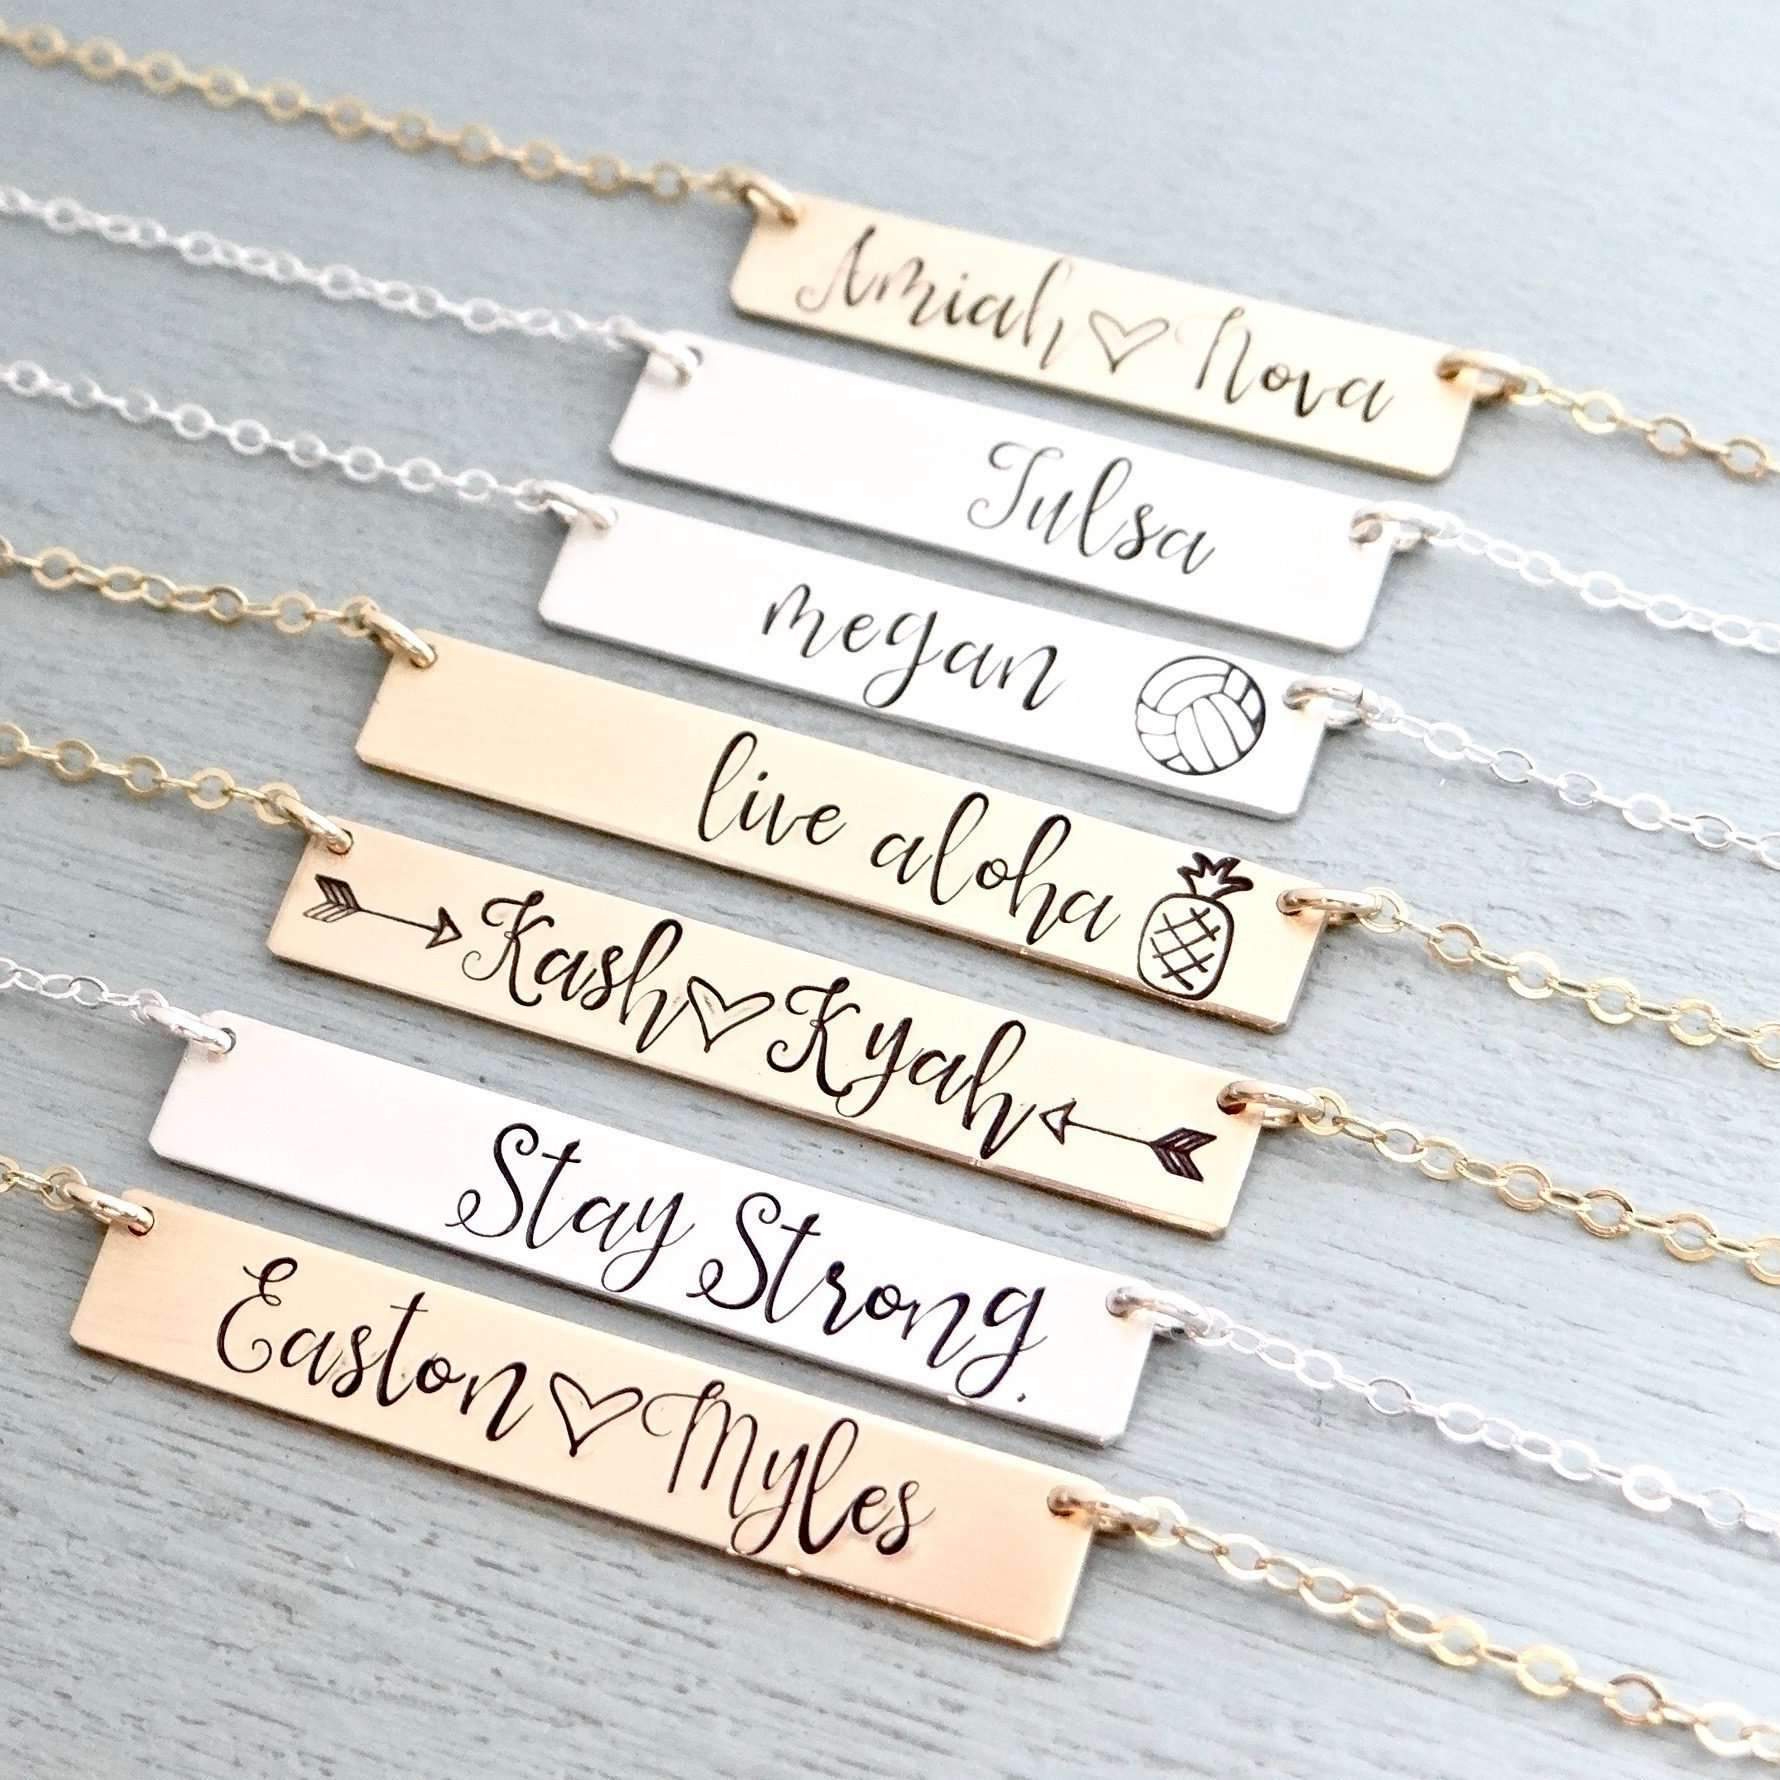 Personalized Bar Name and Birth Date Necklace - Heartfelt Tokens